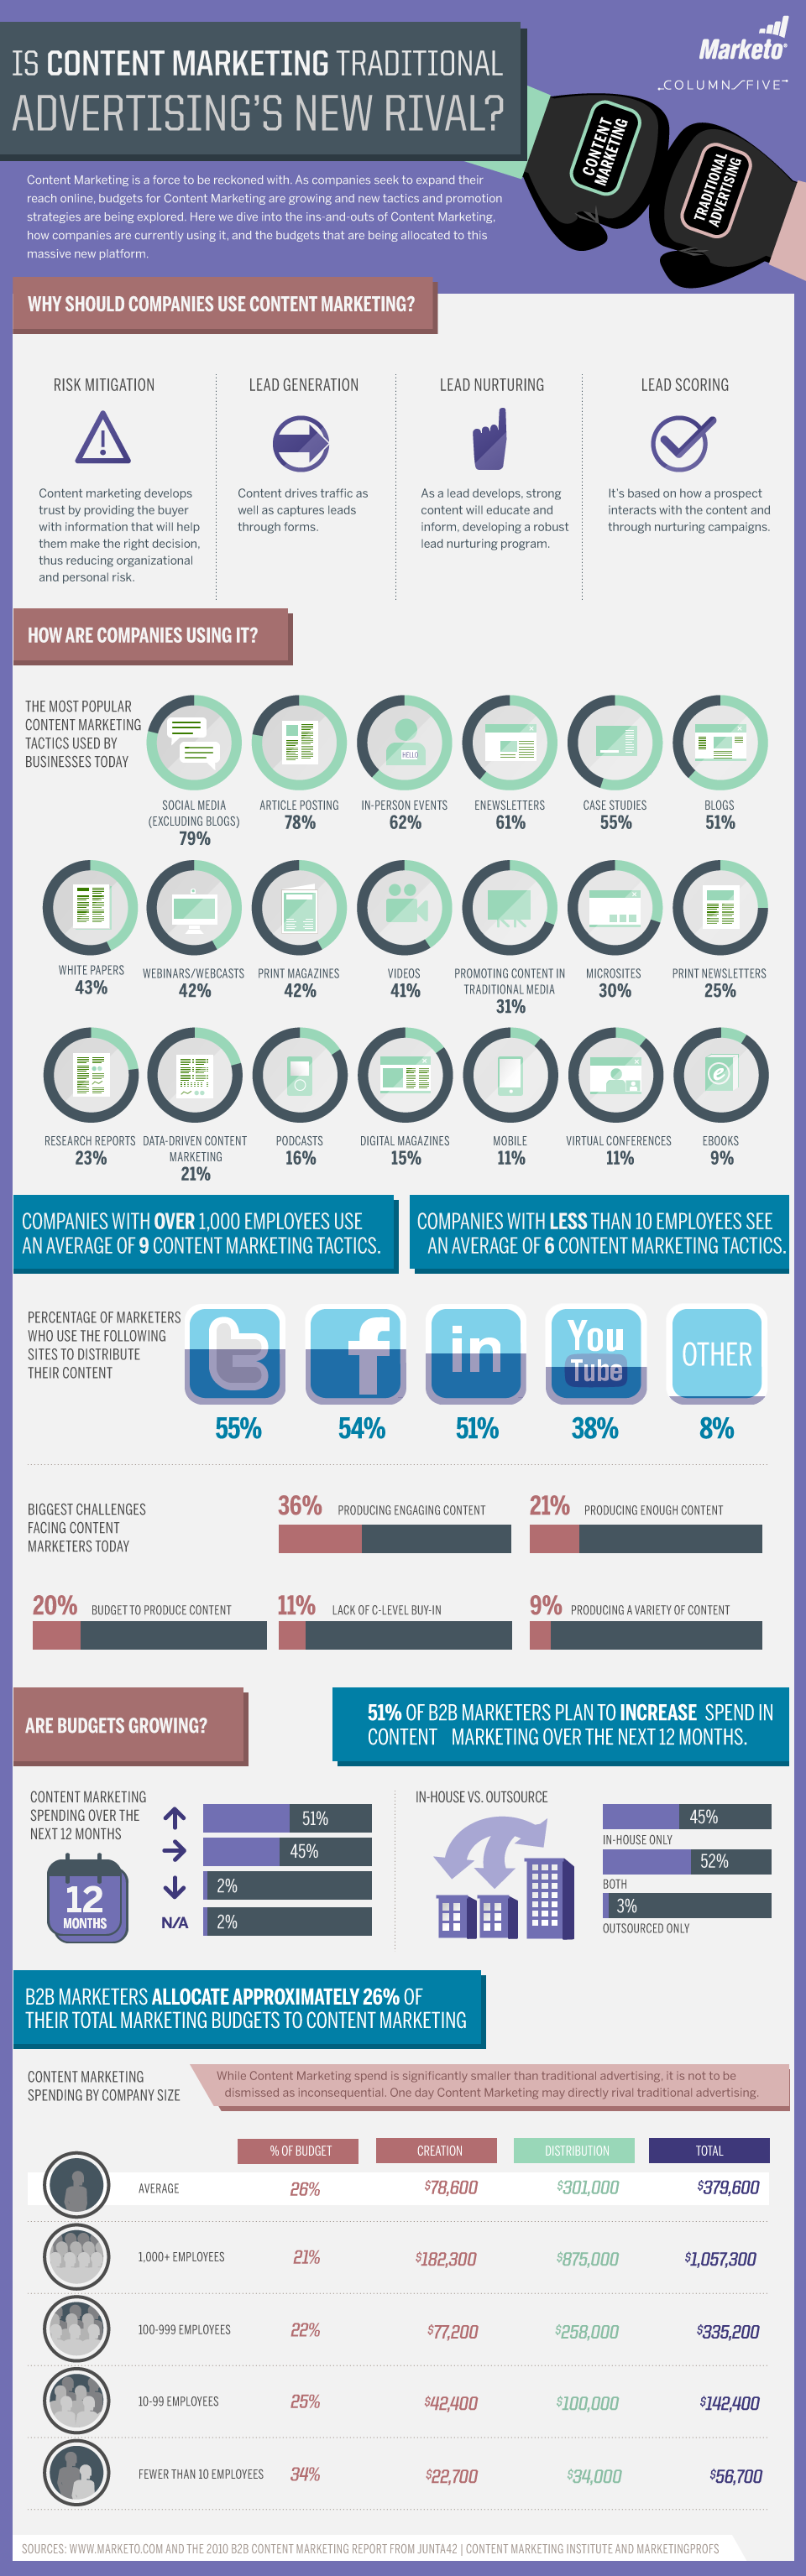 Content Marketing Infographic by Marketo